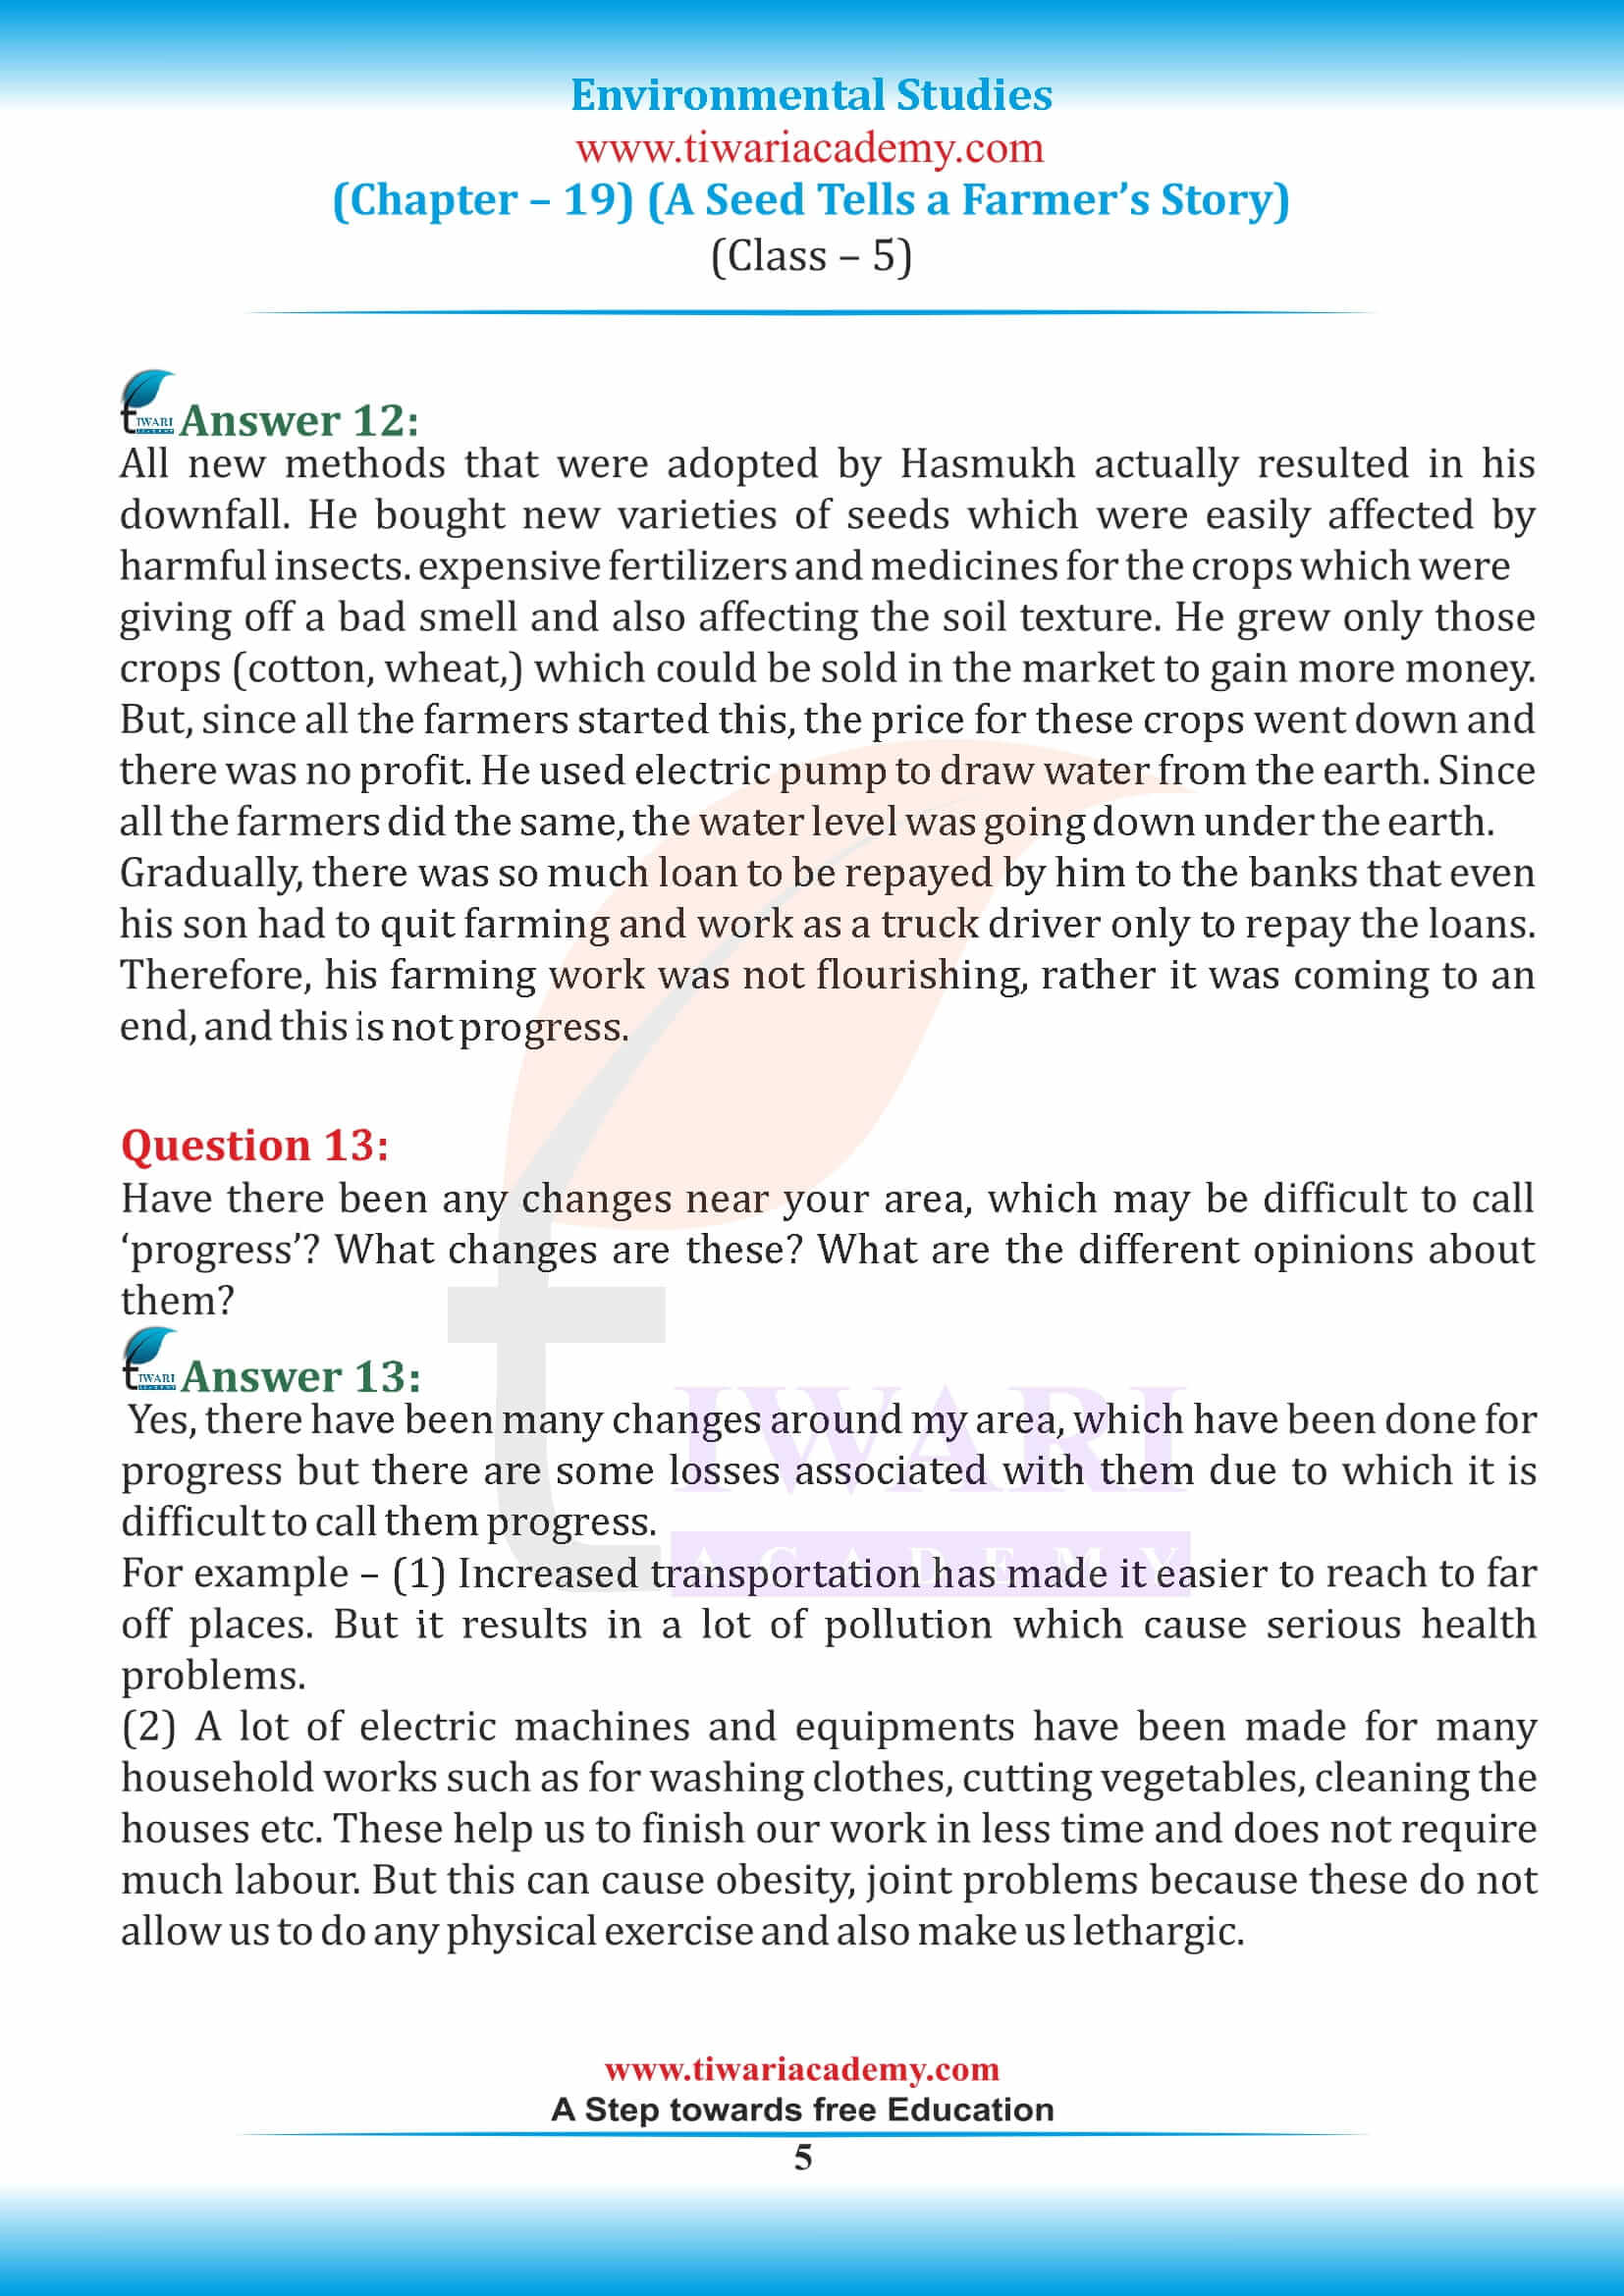 NCERT Solutions for Class 5 EVS Chapter 19 all answers